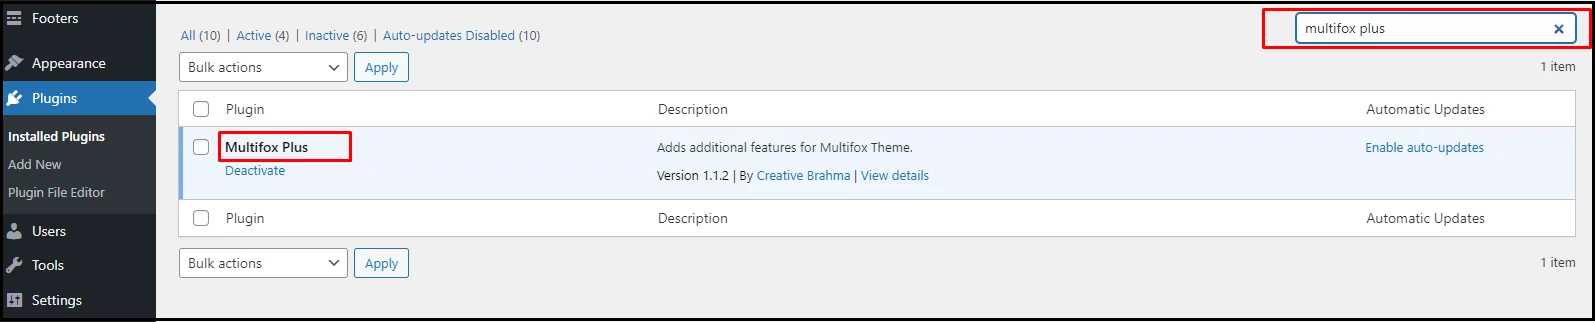 Find The Plugin In The Installed Plugins Section